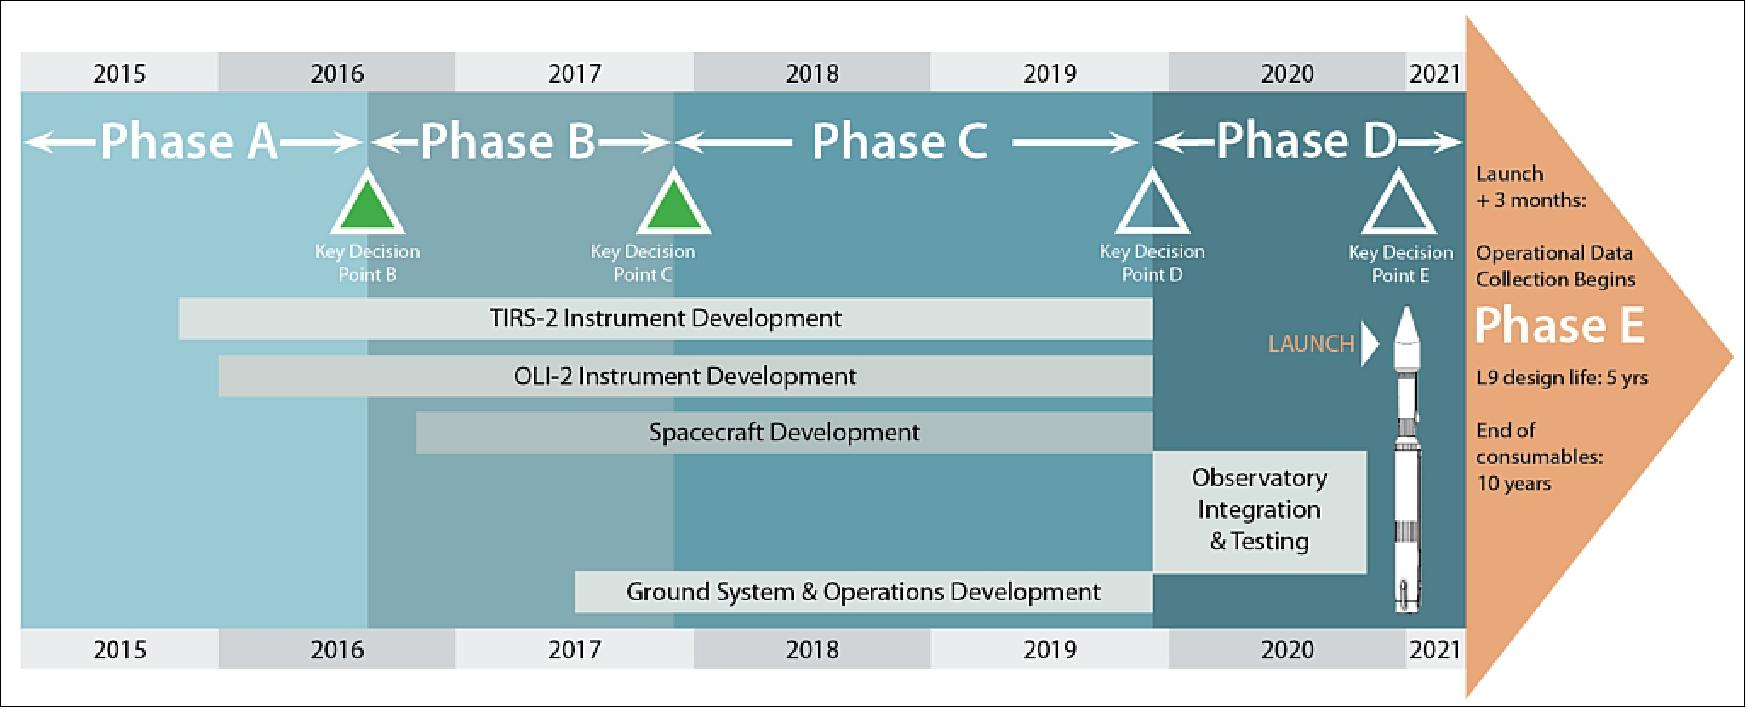 Figure 11: A timeline of the Landsat-9 mission development and lifecycle (image credit: NASA) 29)